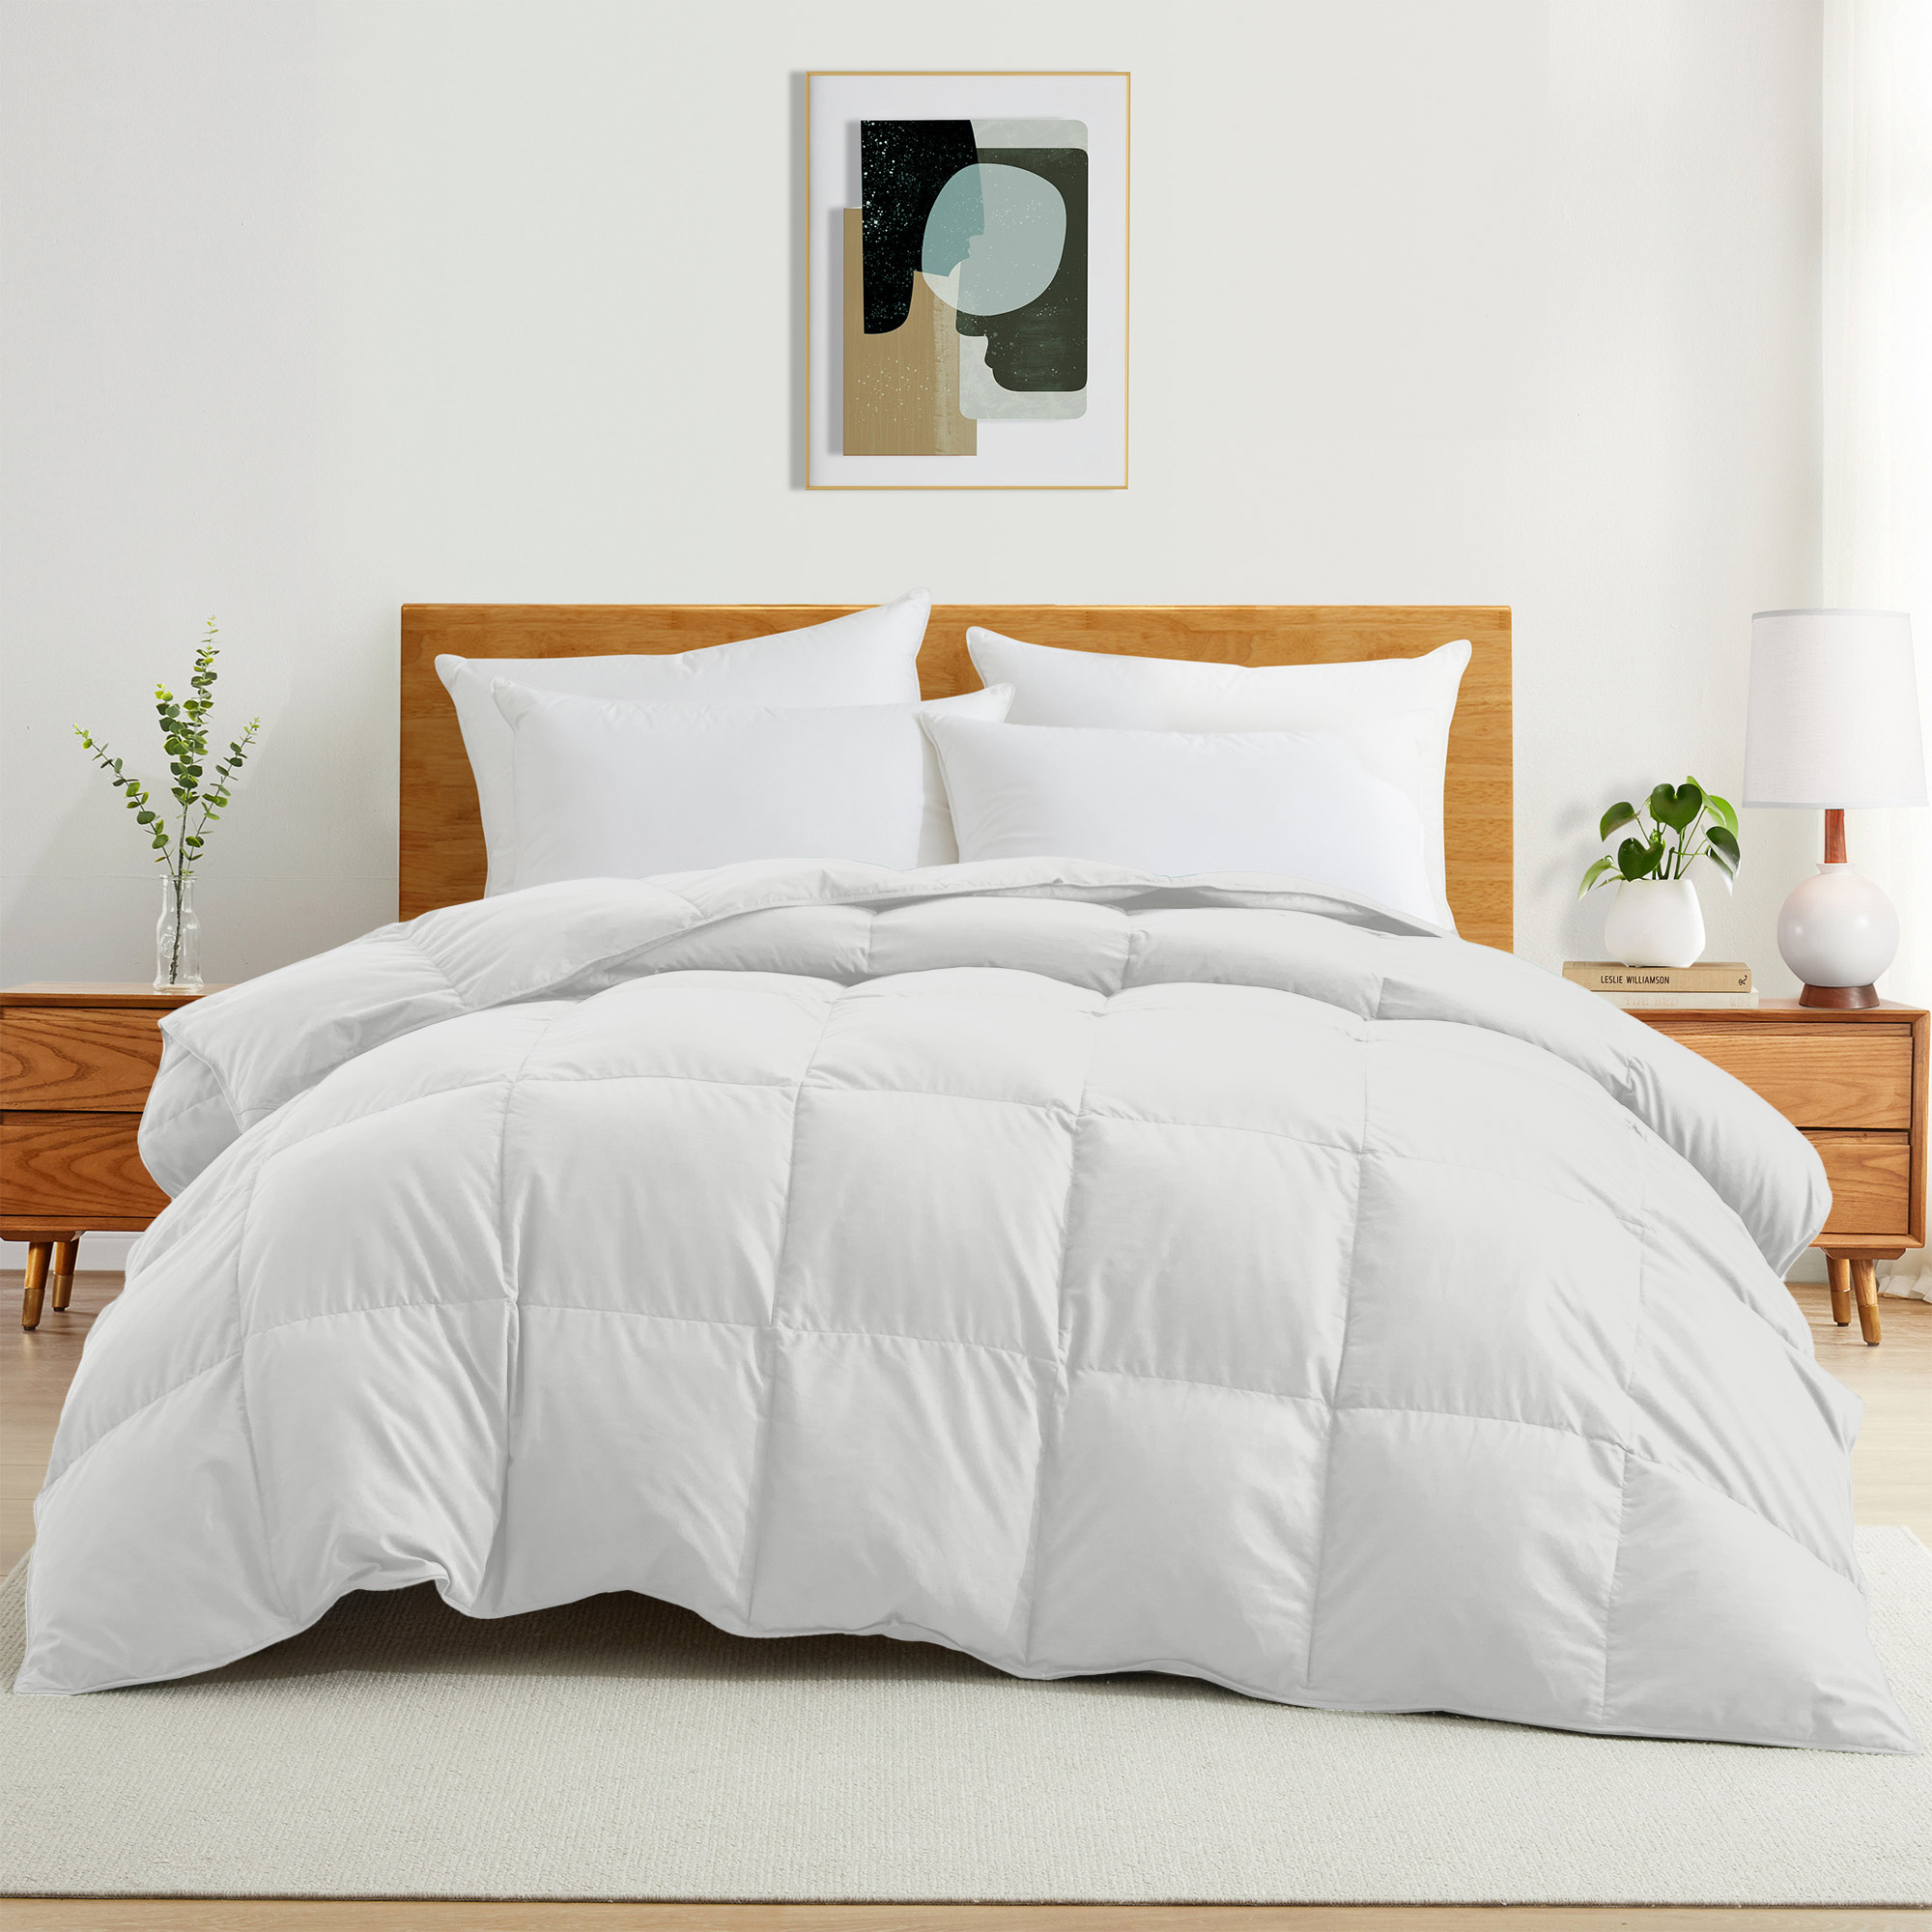 All Seasons Goose Down Feather Comforter Ultra Soft Comforter With Peach Skin Fabric - White, Full/Queen-88*88